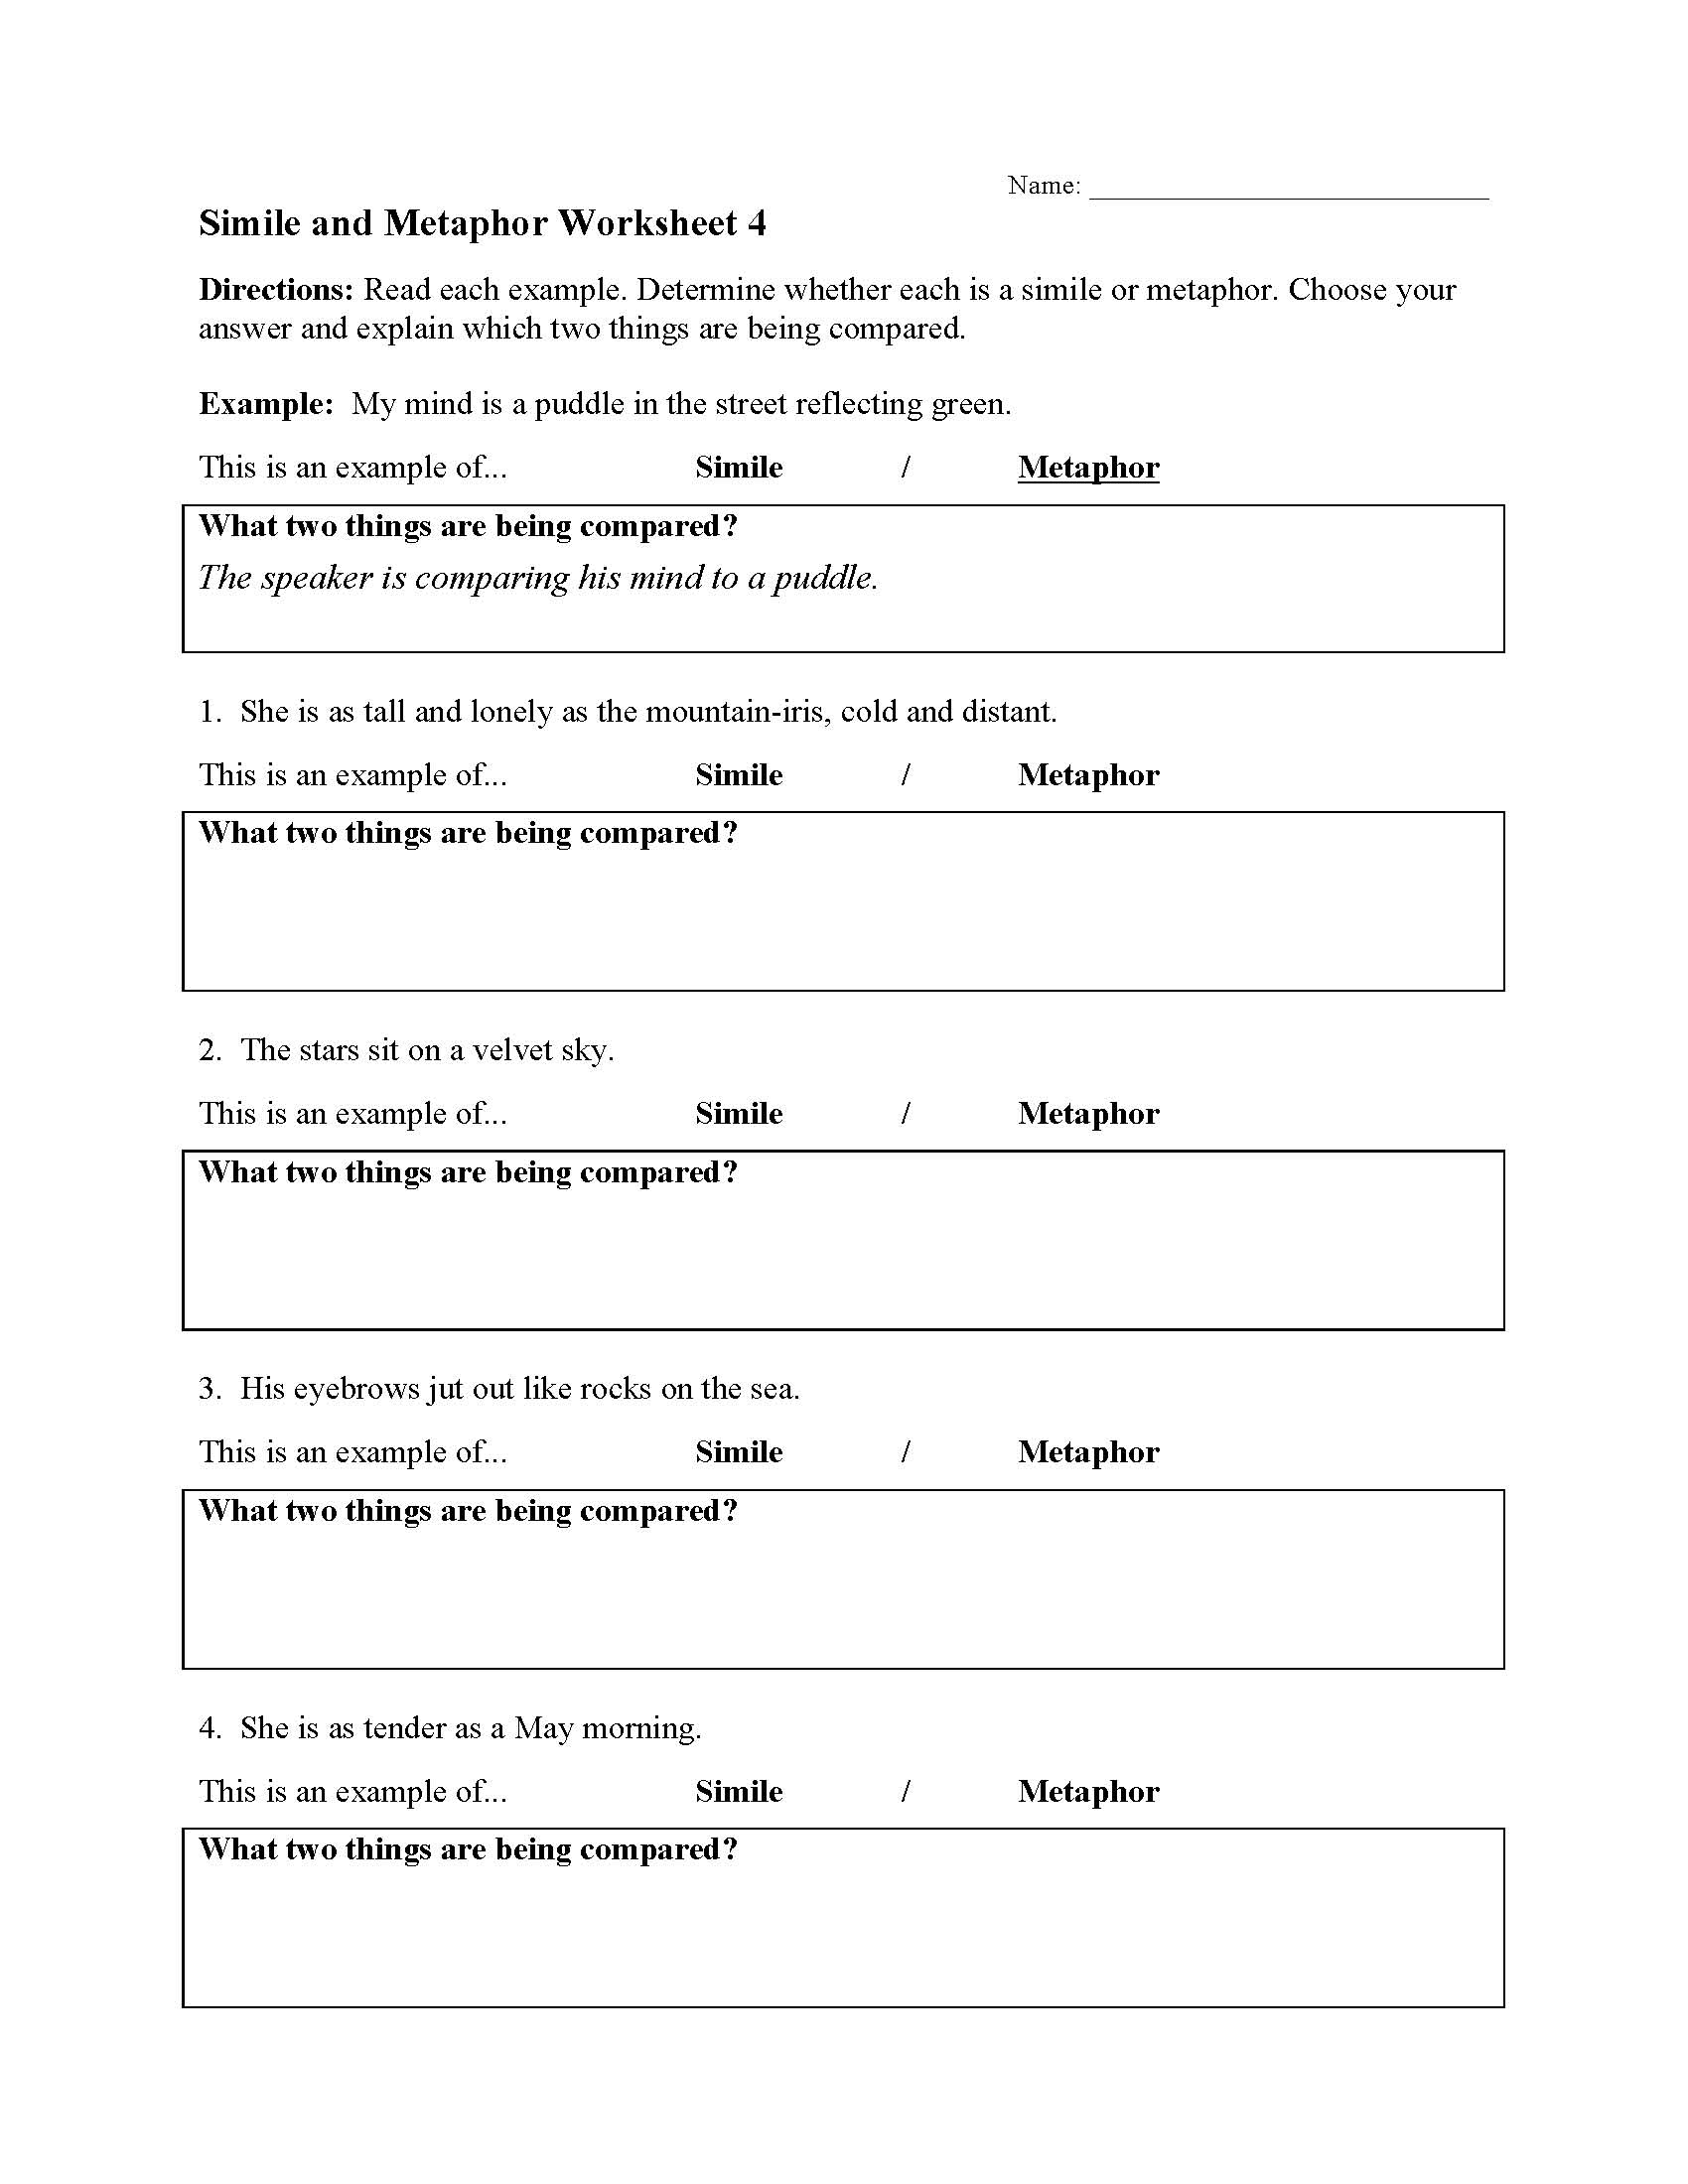 This is a preview image of Simile and Metaphor Worksheet 4. Click on it to enlarge it or view the source file.